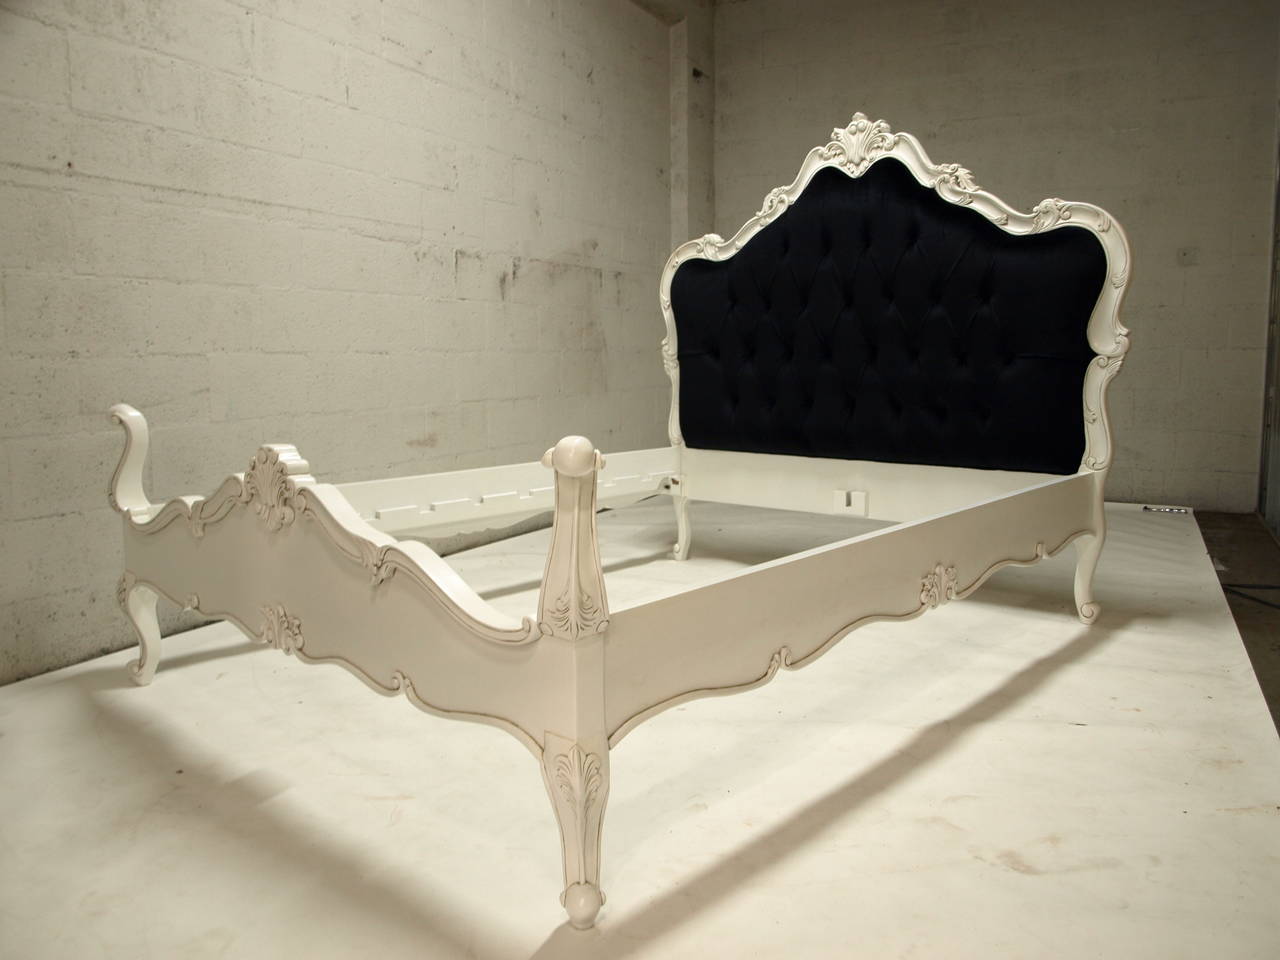 French Louis XV style bed in Queen size. Mahogany wood painted in white with beautiful hand carvings. Headboard upholstered in black velvet and deep tufted. This bed can be customized, please contact us.